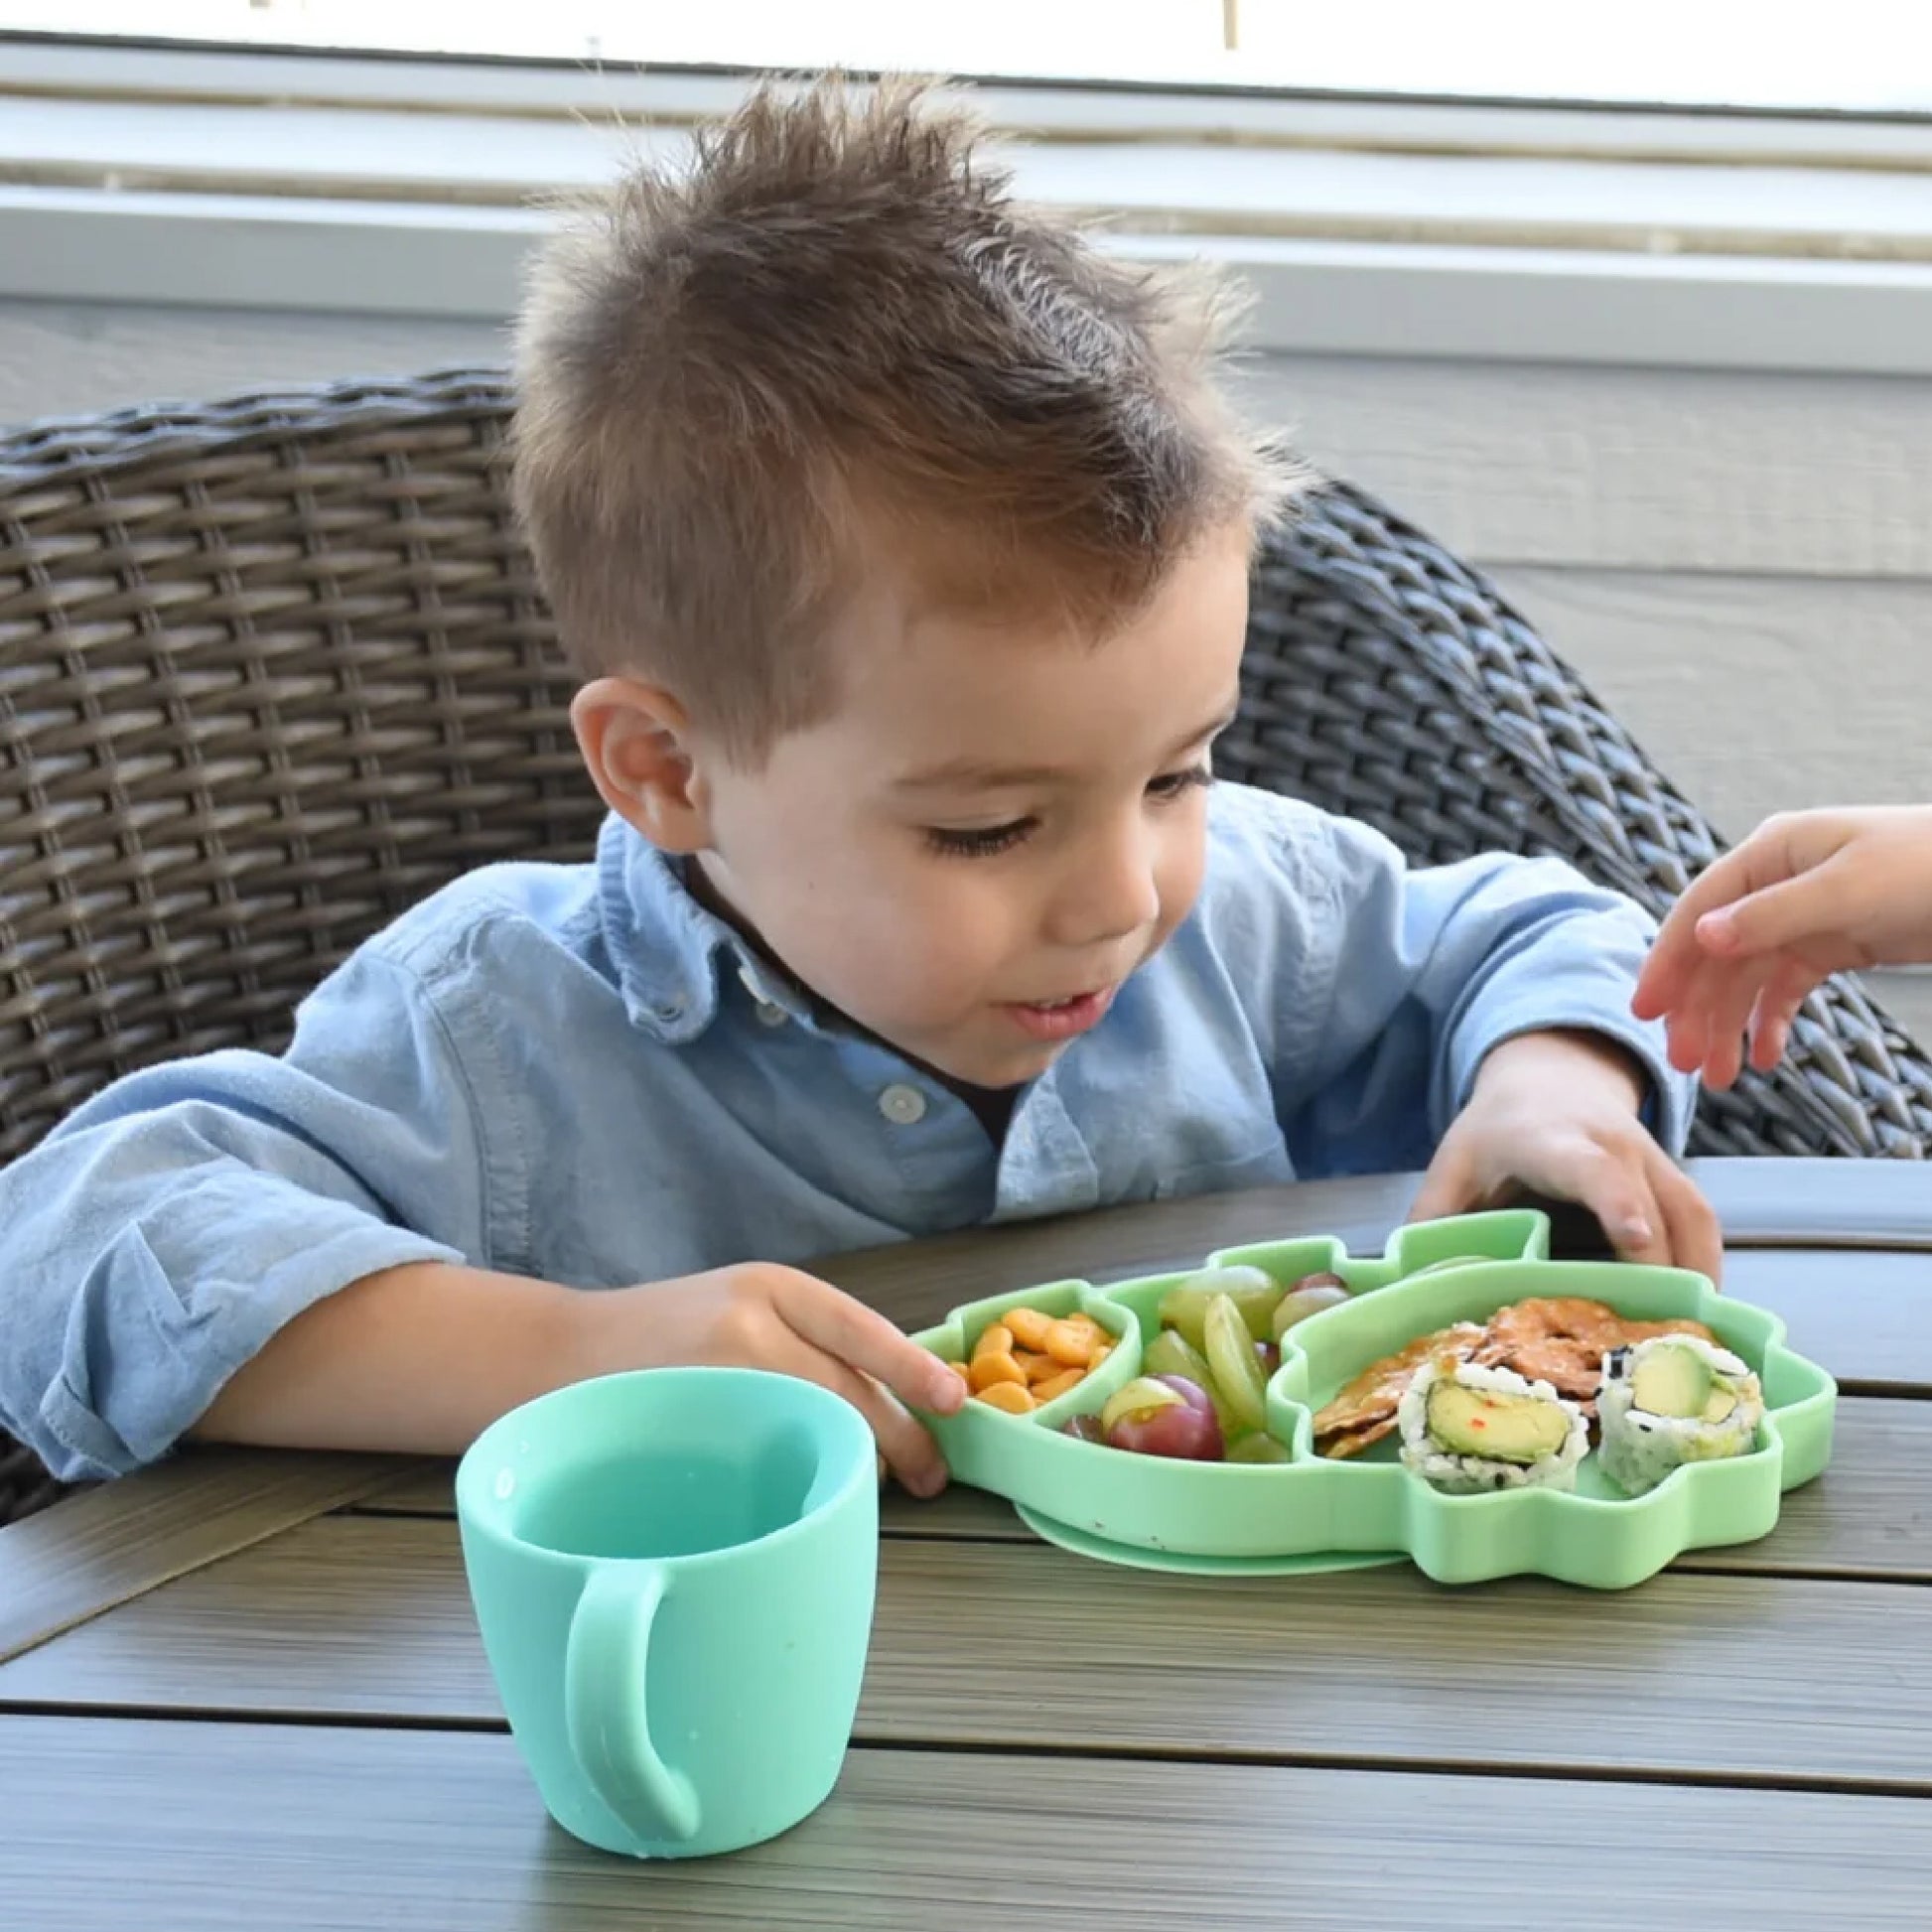 melii Silicone Suction Plate for Babies & Toddlers - Dinosaur Division Plate for Picky Eaters - Secure Self Feeding Solution, BPA Free, Microwave & Dishwasher Safe